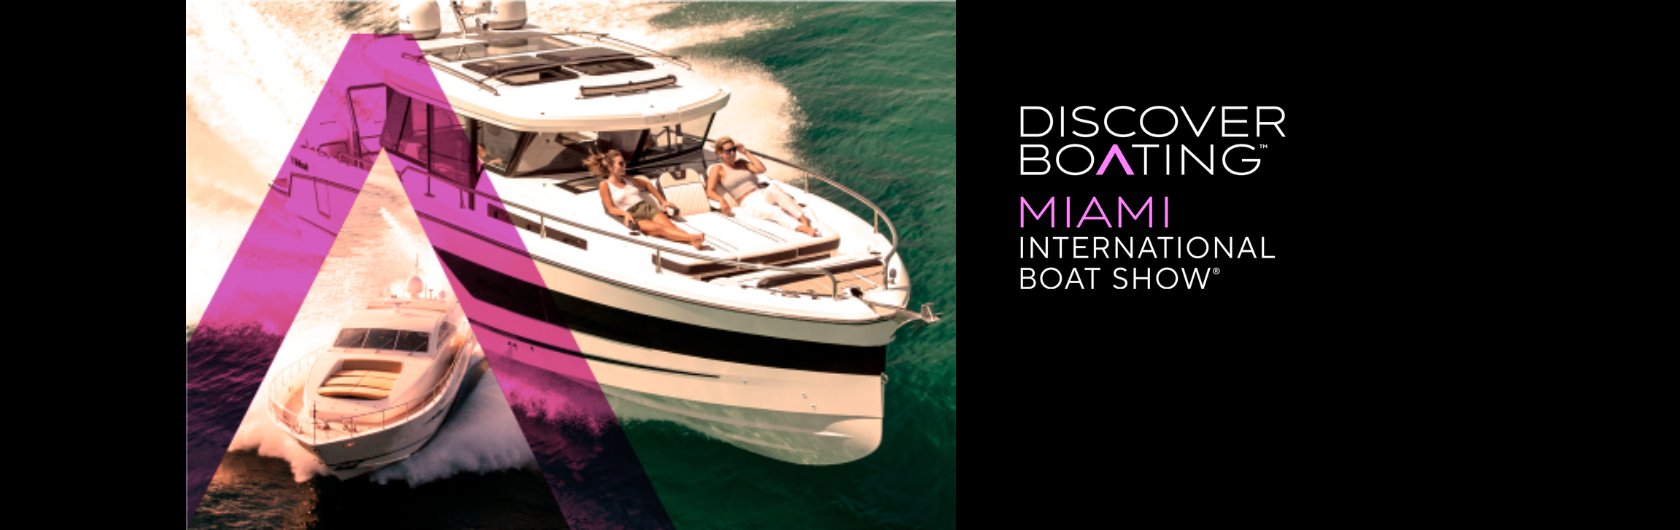 Come see ugo® at the Miami International Boat Show